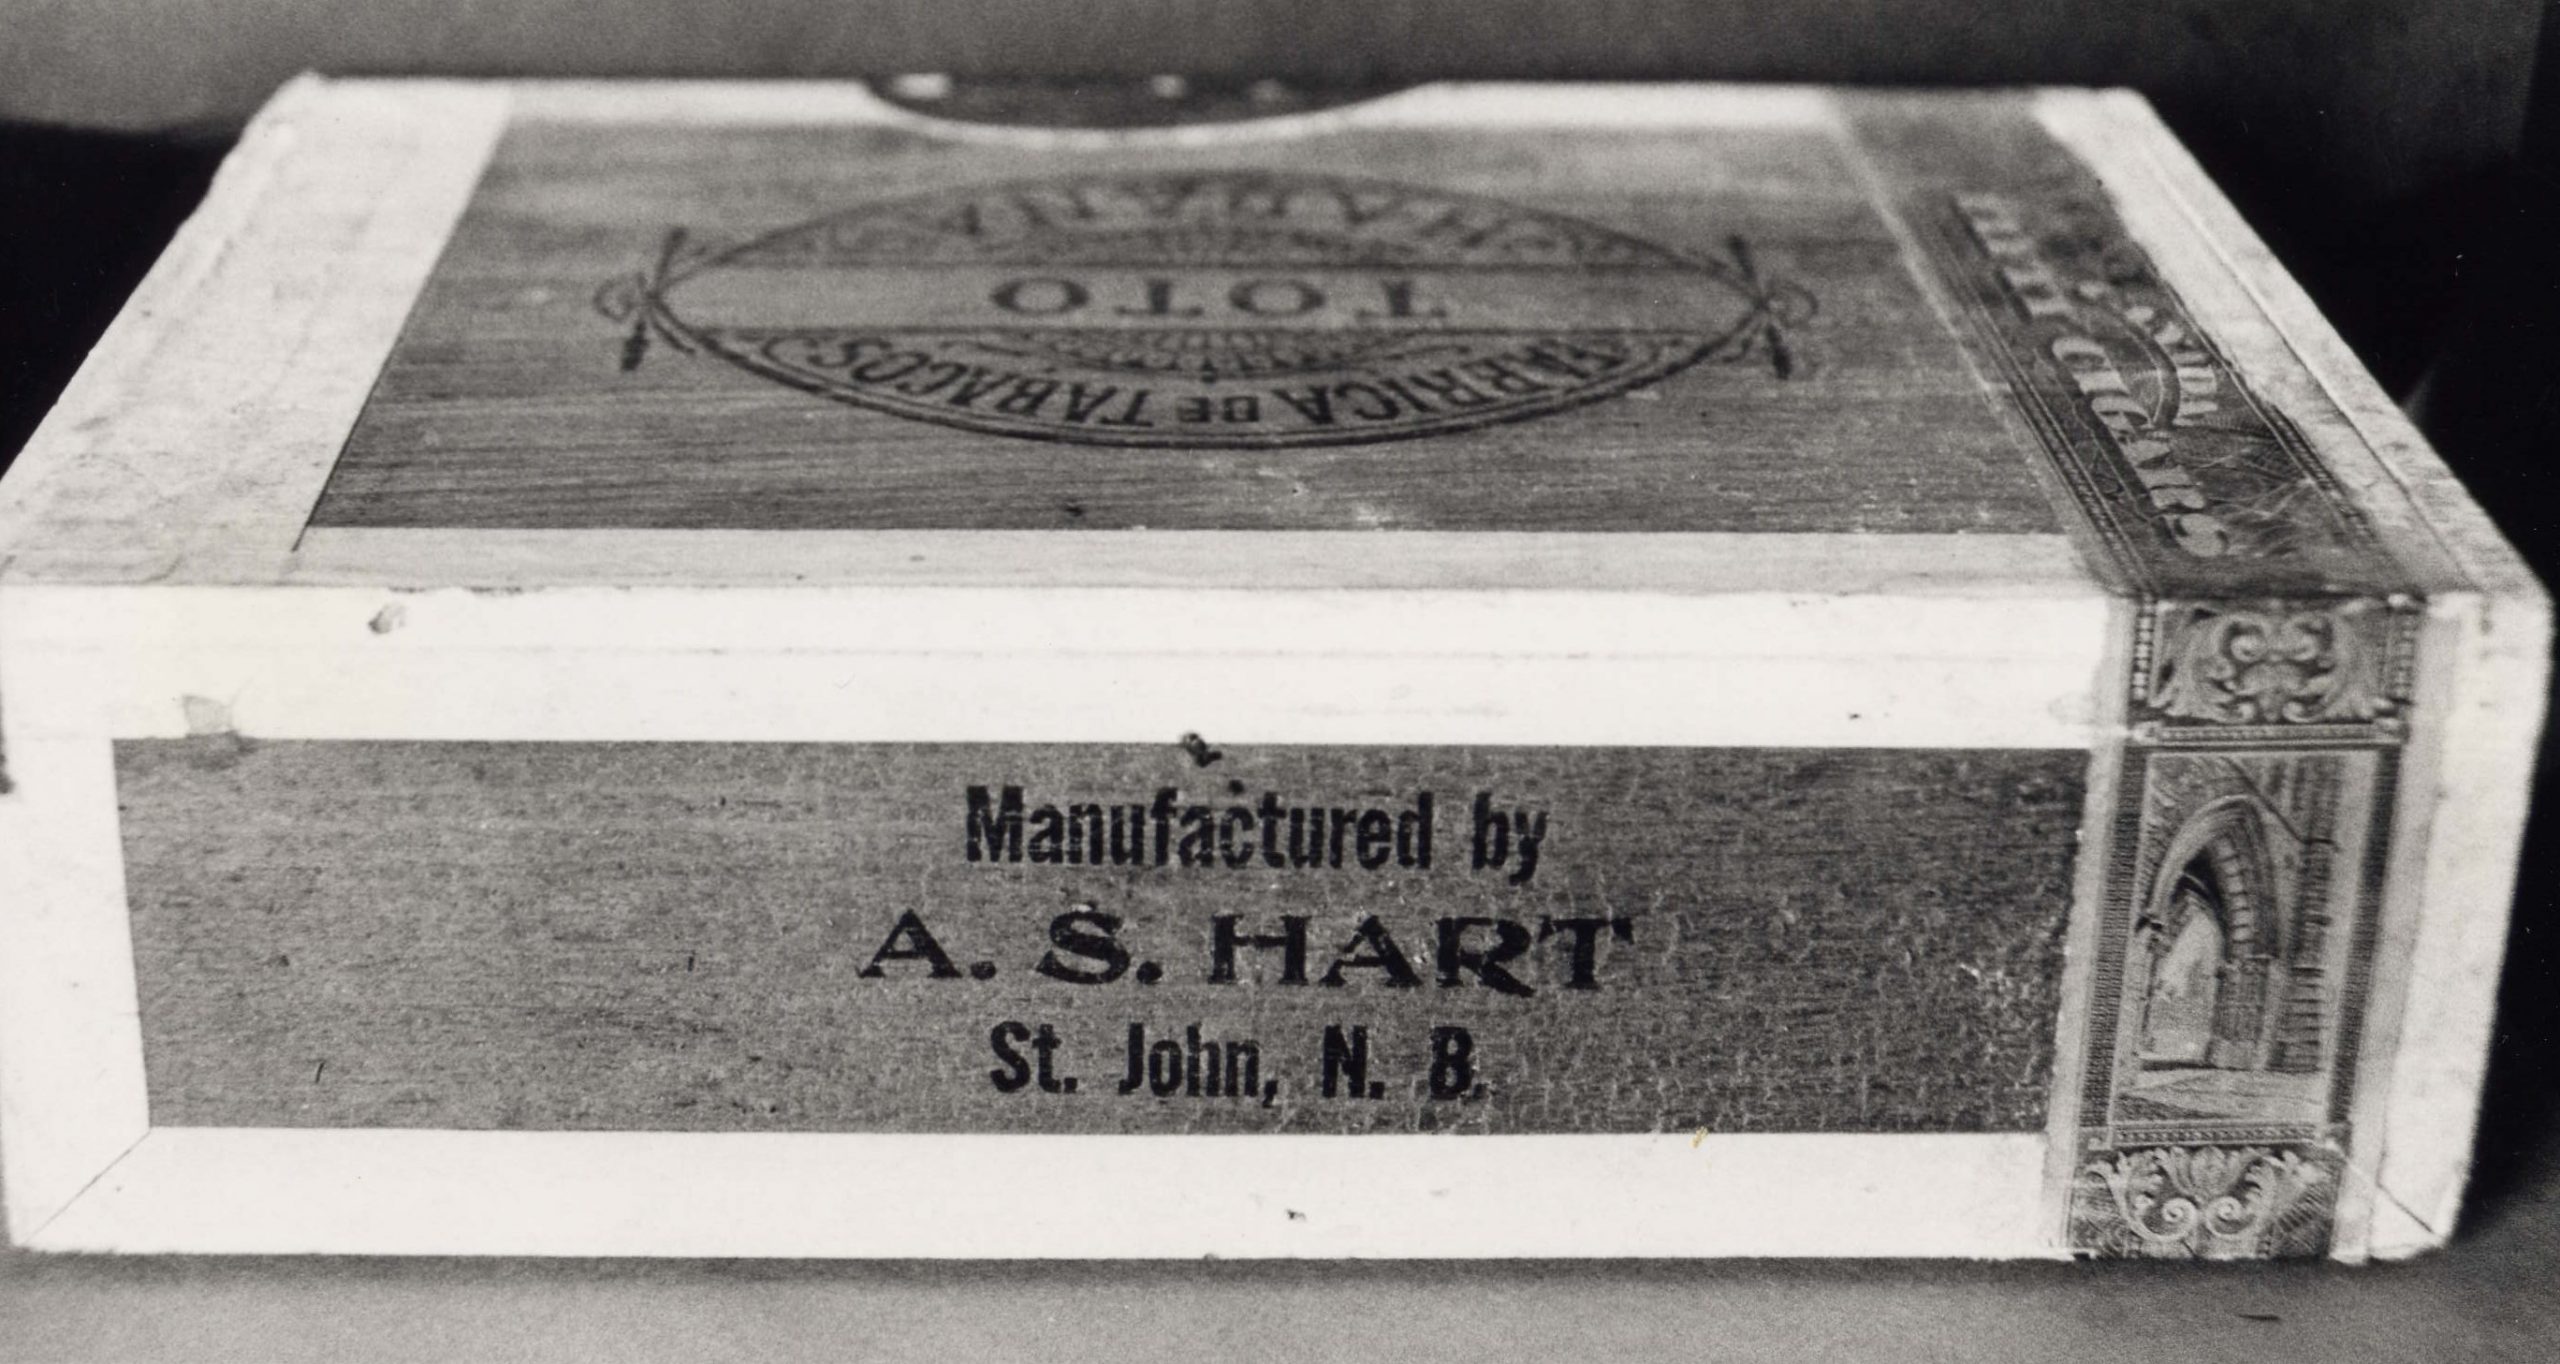 Wooden cigar box with label on front panel – Manufactured by A.S. Hart – St. John, N.B.